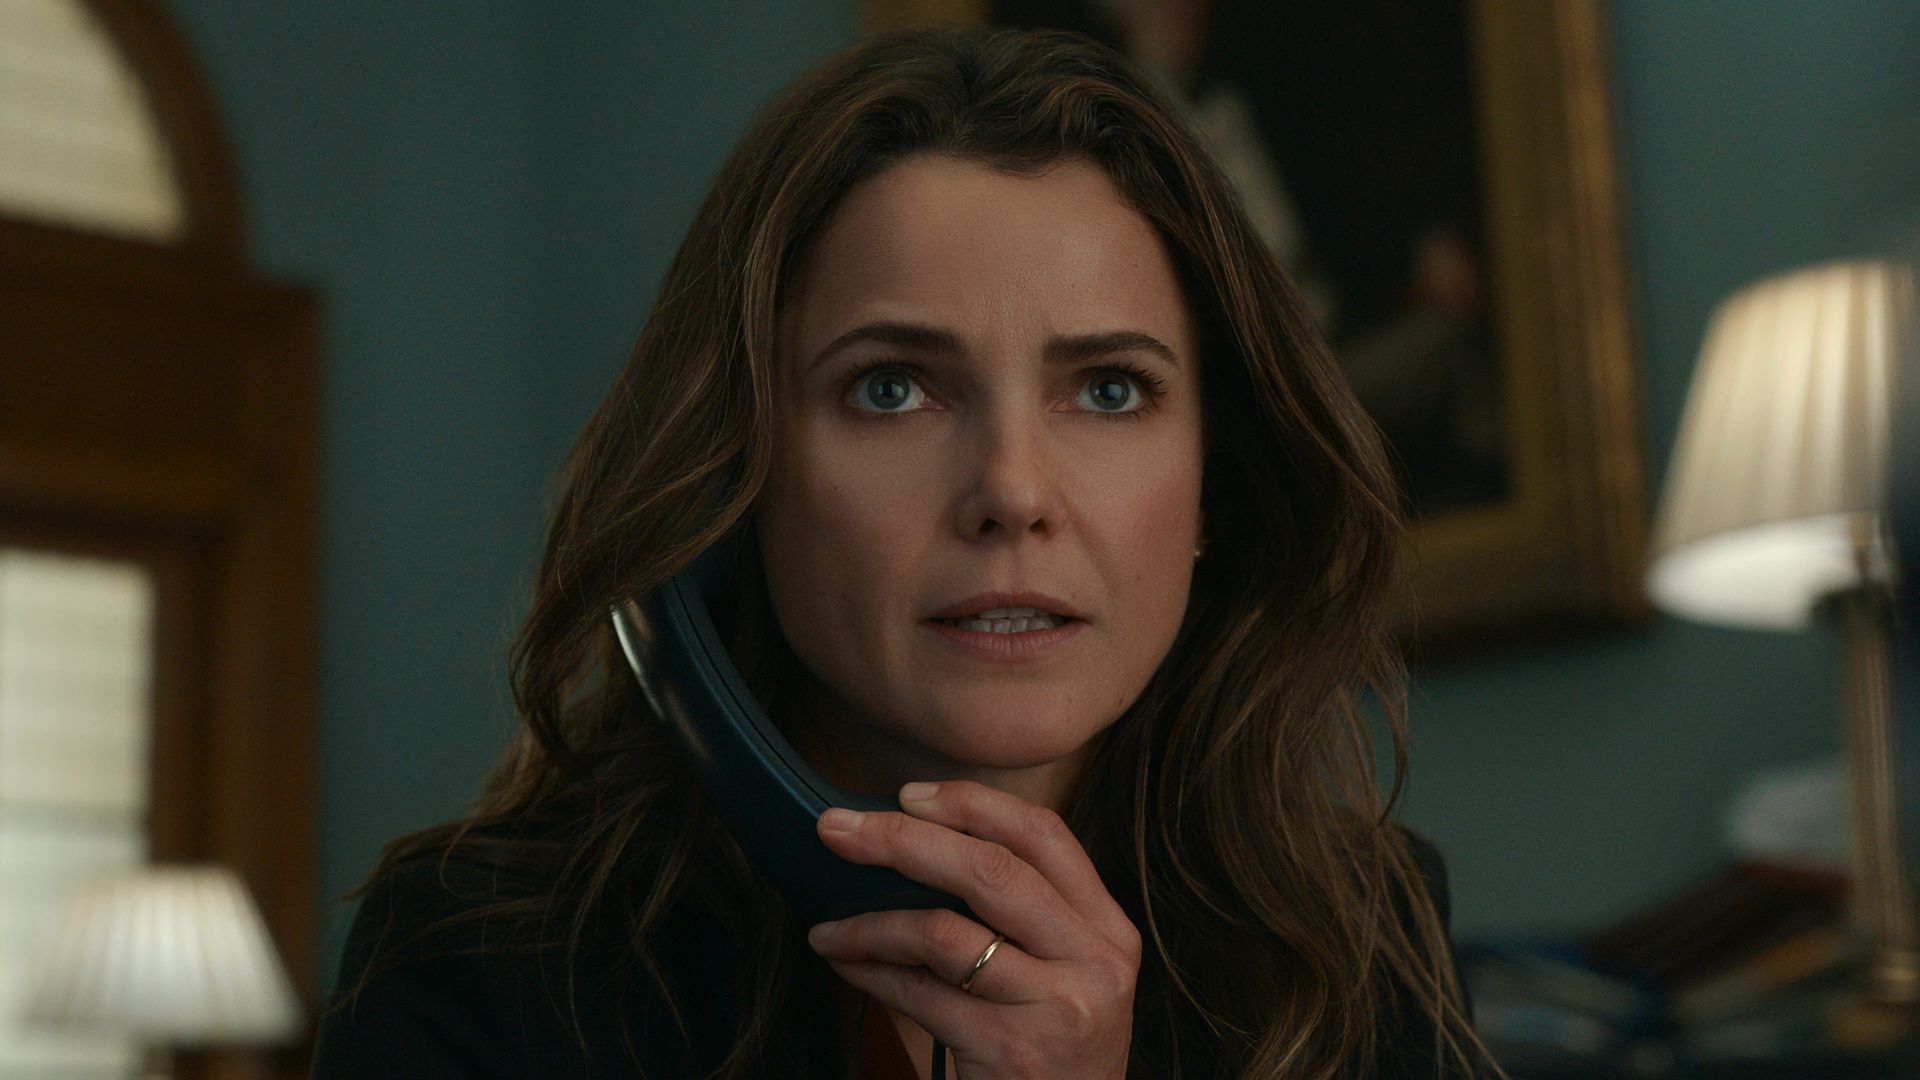 Keri Russell as Kate Wyler takes phone call in The Diplomat on Netflix